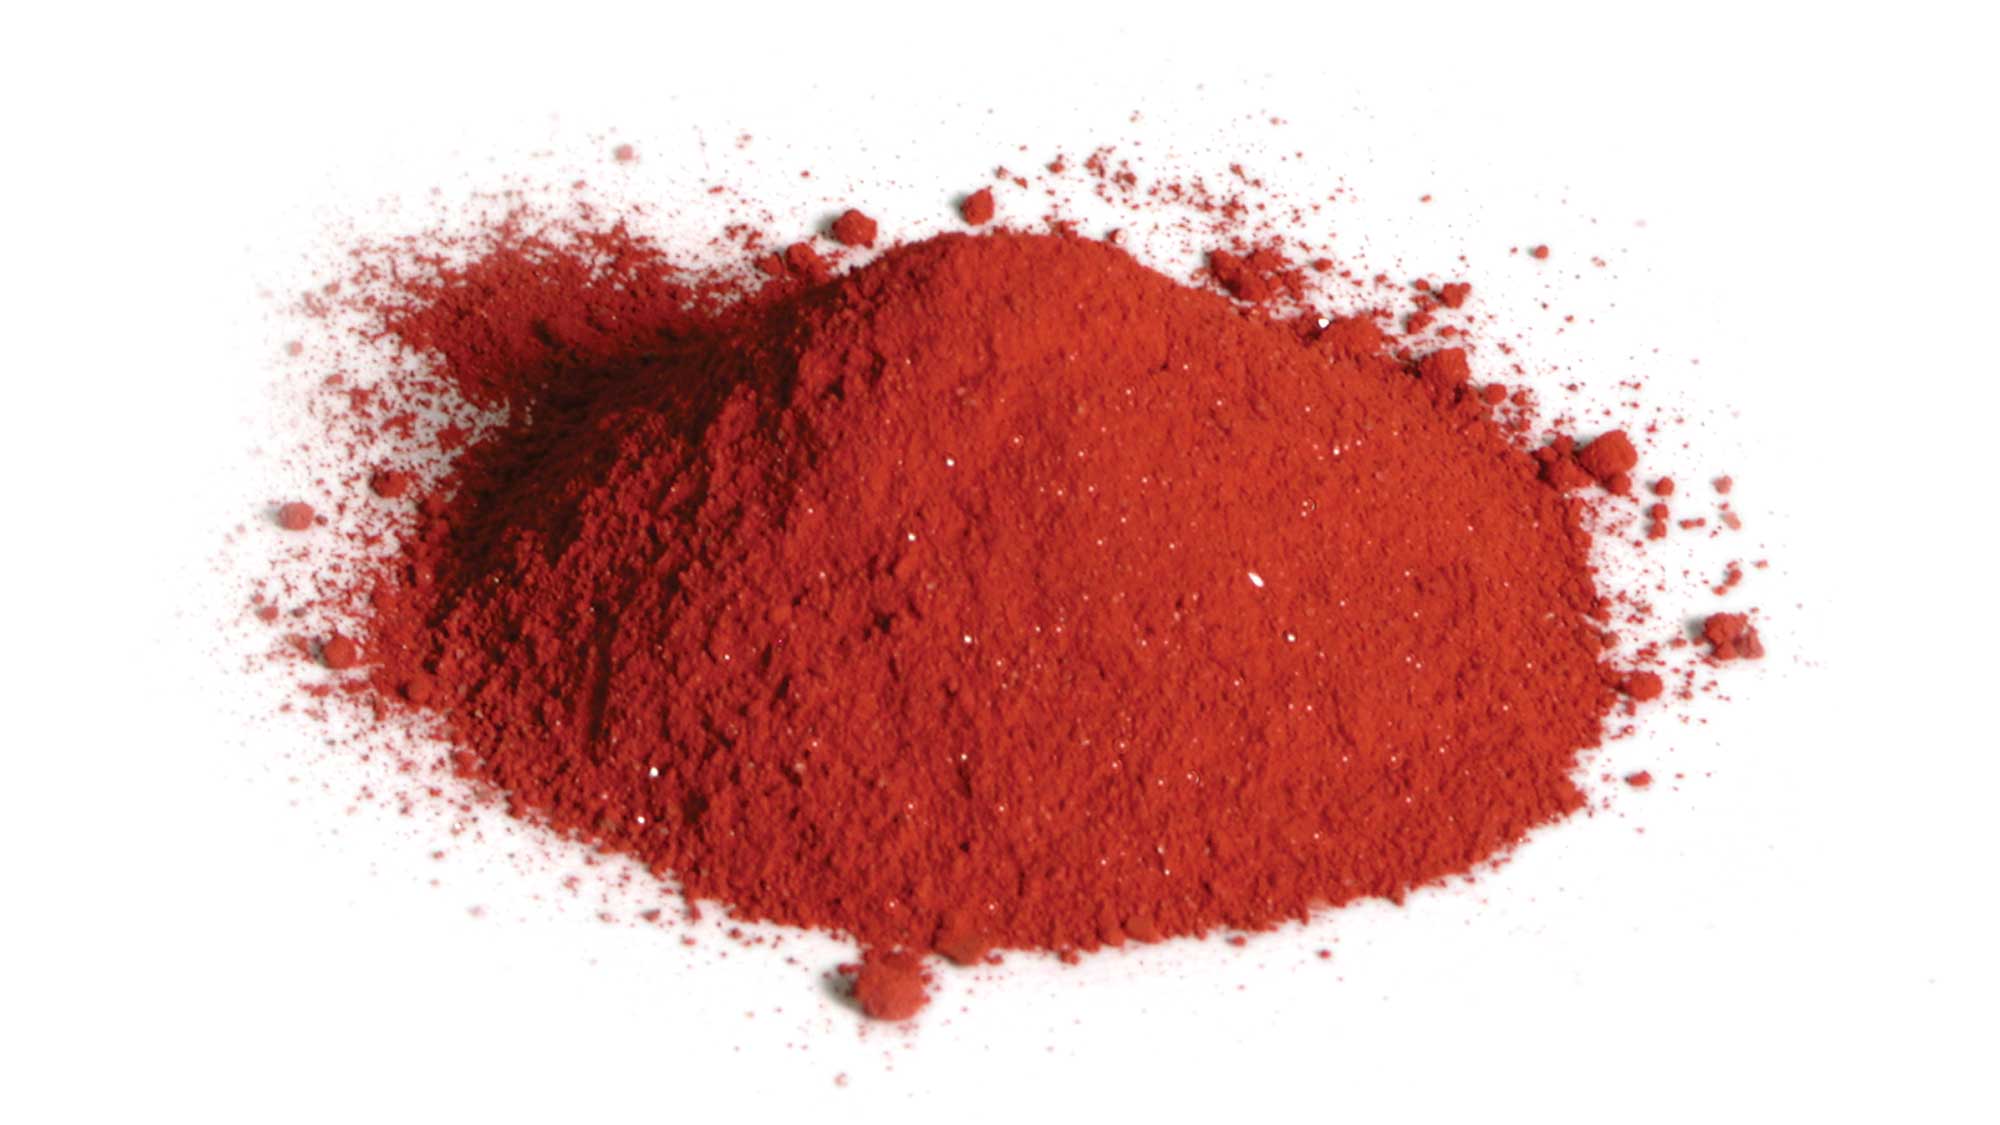 Vermilion and Cinnabar Toxicology Test Results